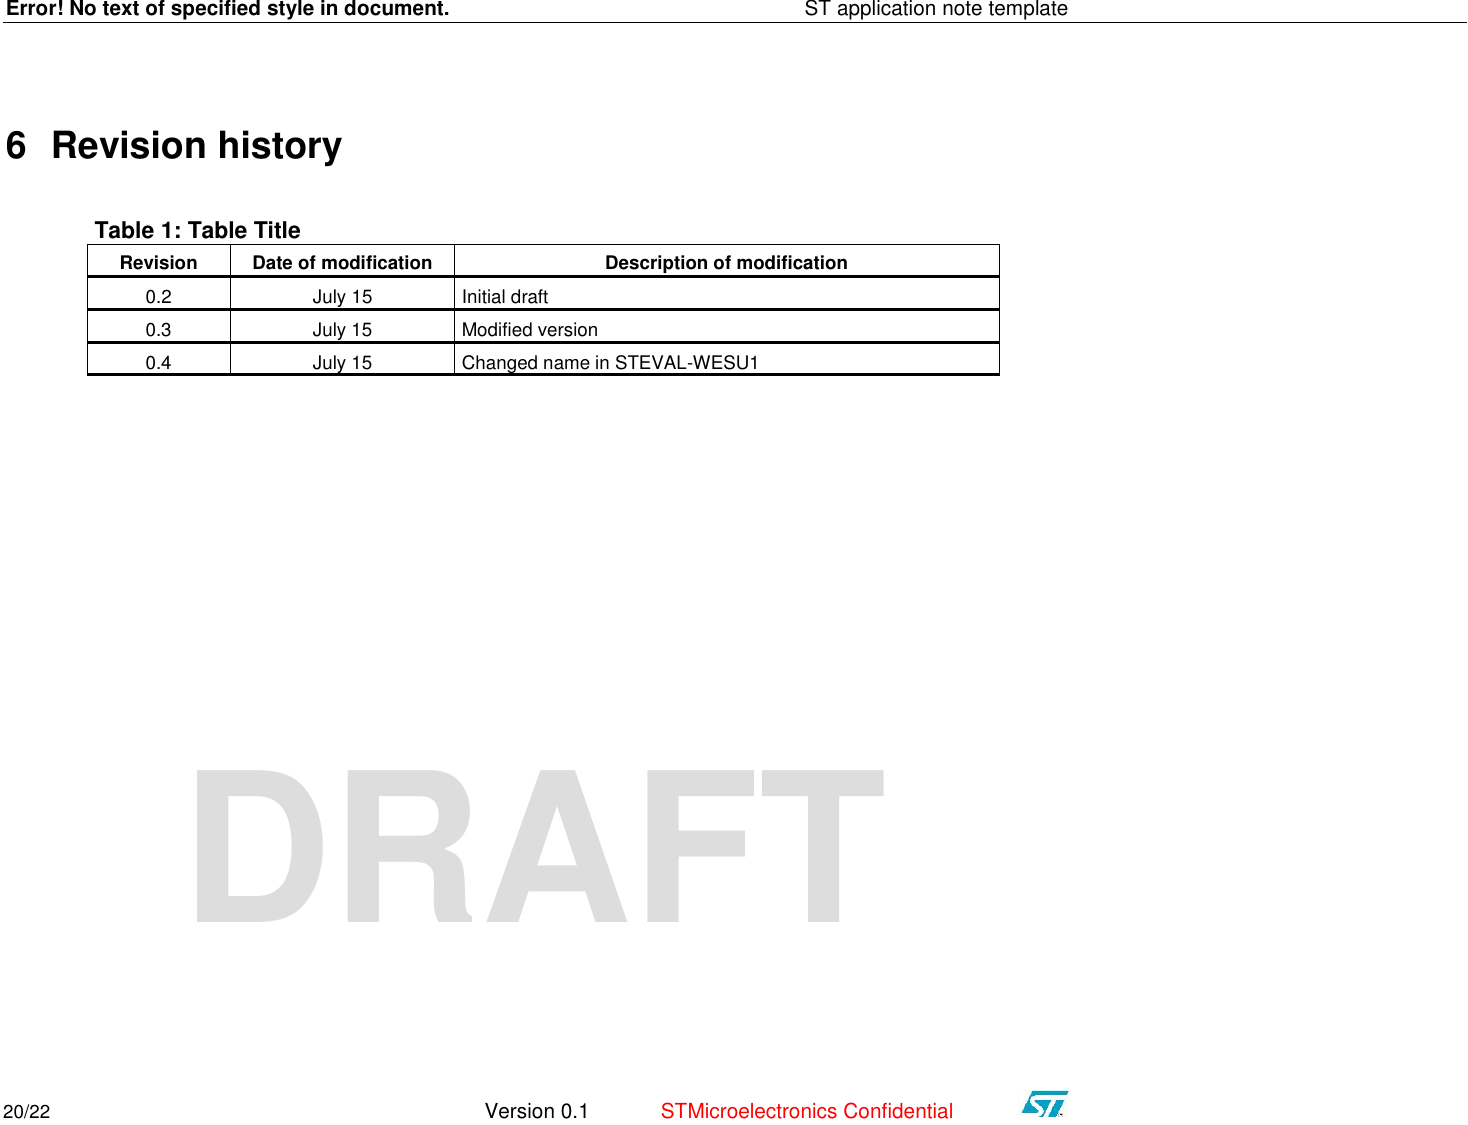 Error! No text of specified style in document.    ST application note template 20/22   Version 0.1  STMicroelectronics Confidential   DRAFT 6 Revision history Table 1: Table Title Revision Date of modification  Description of modification  0.2 July 15 Initial draft  0.3 July 15 Modified version 0.4 July 15 Changed name in STEVAL-WESU1                     